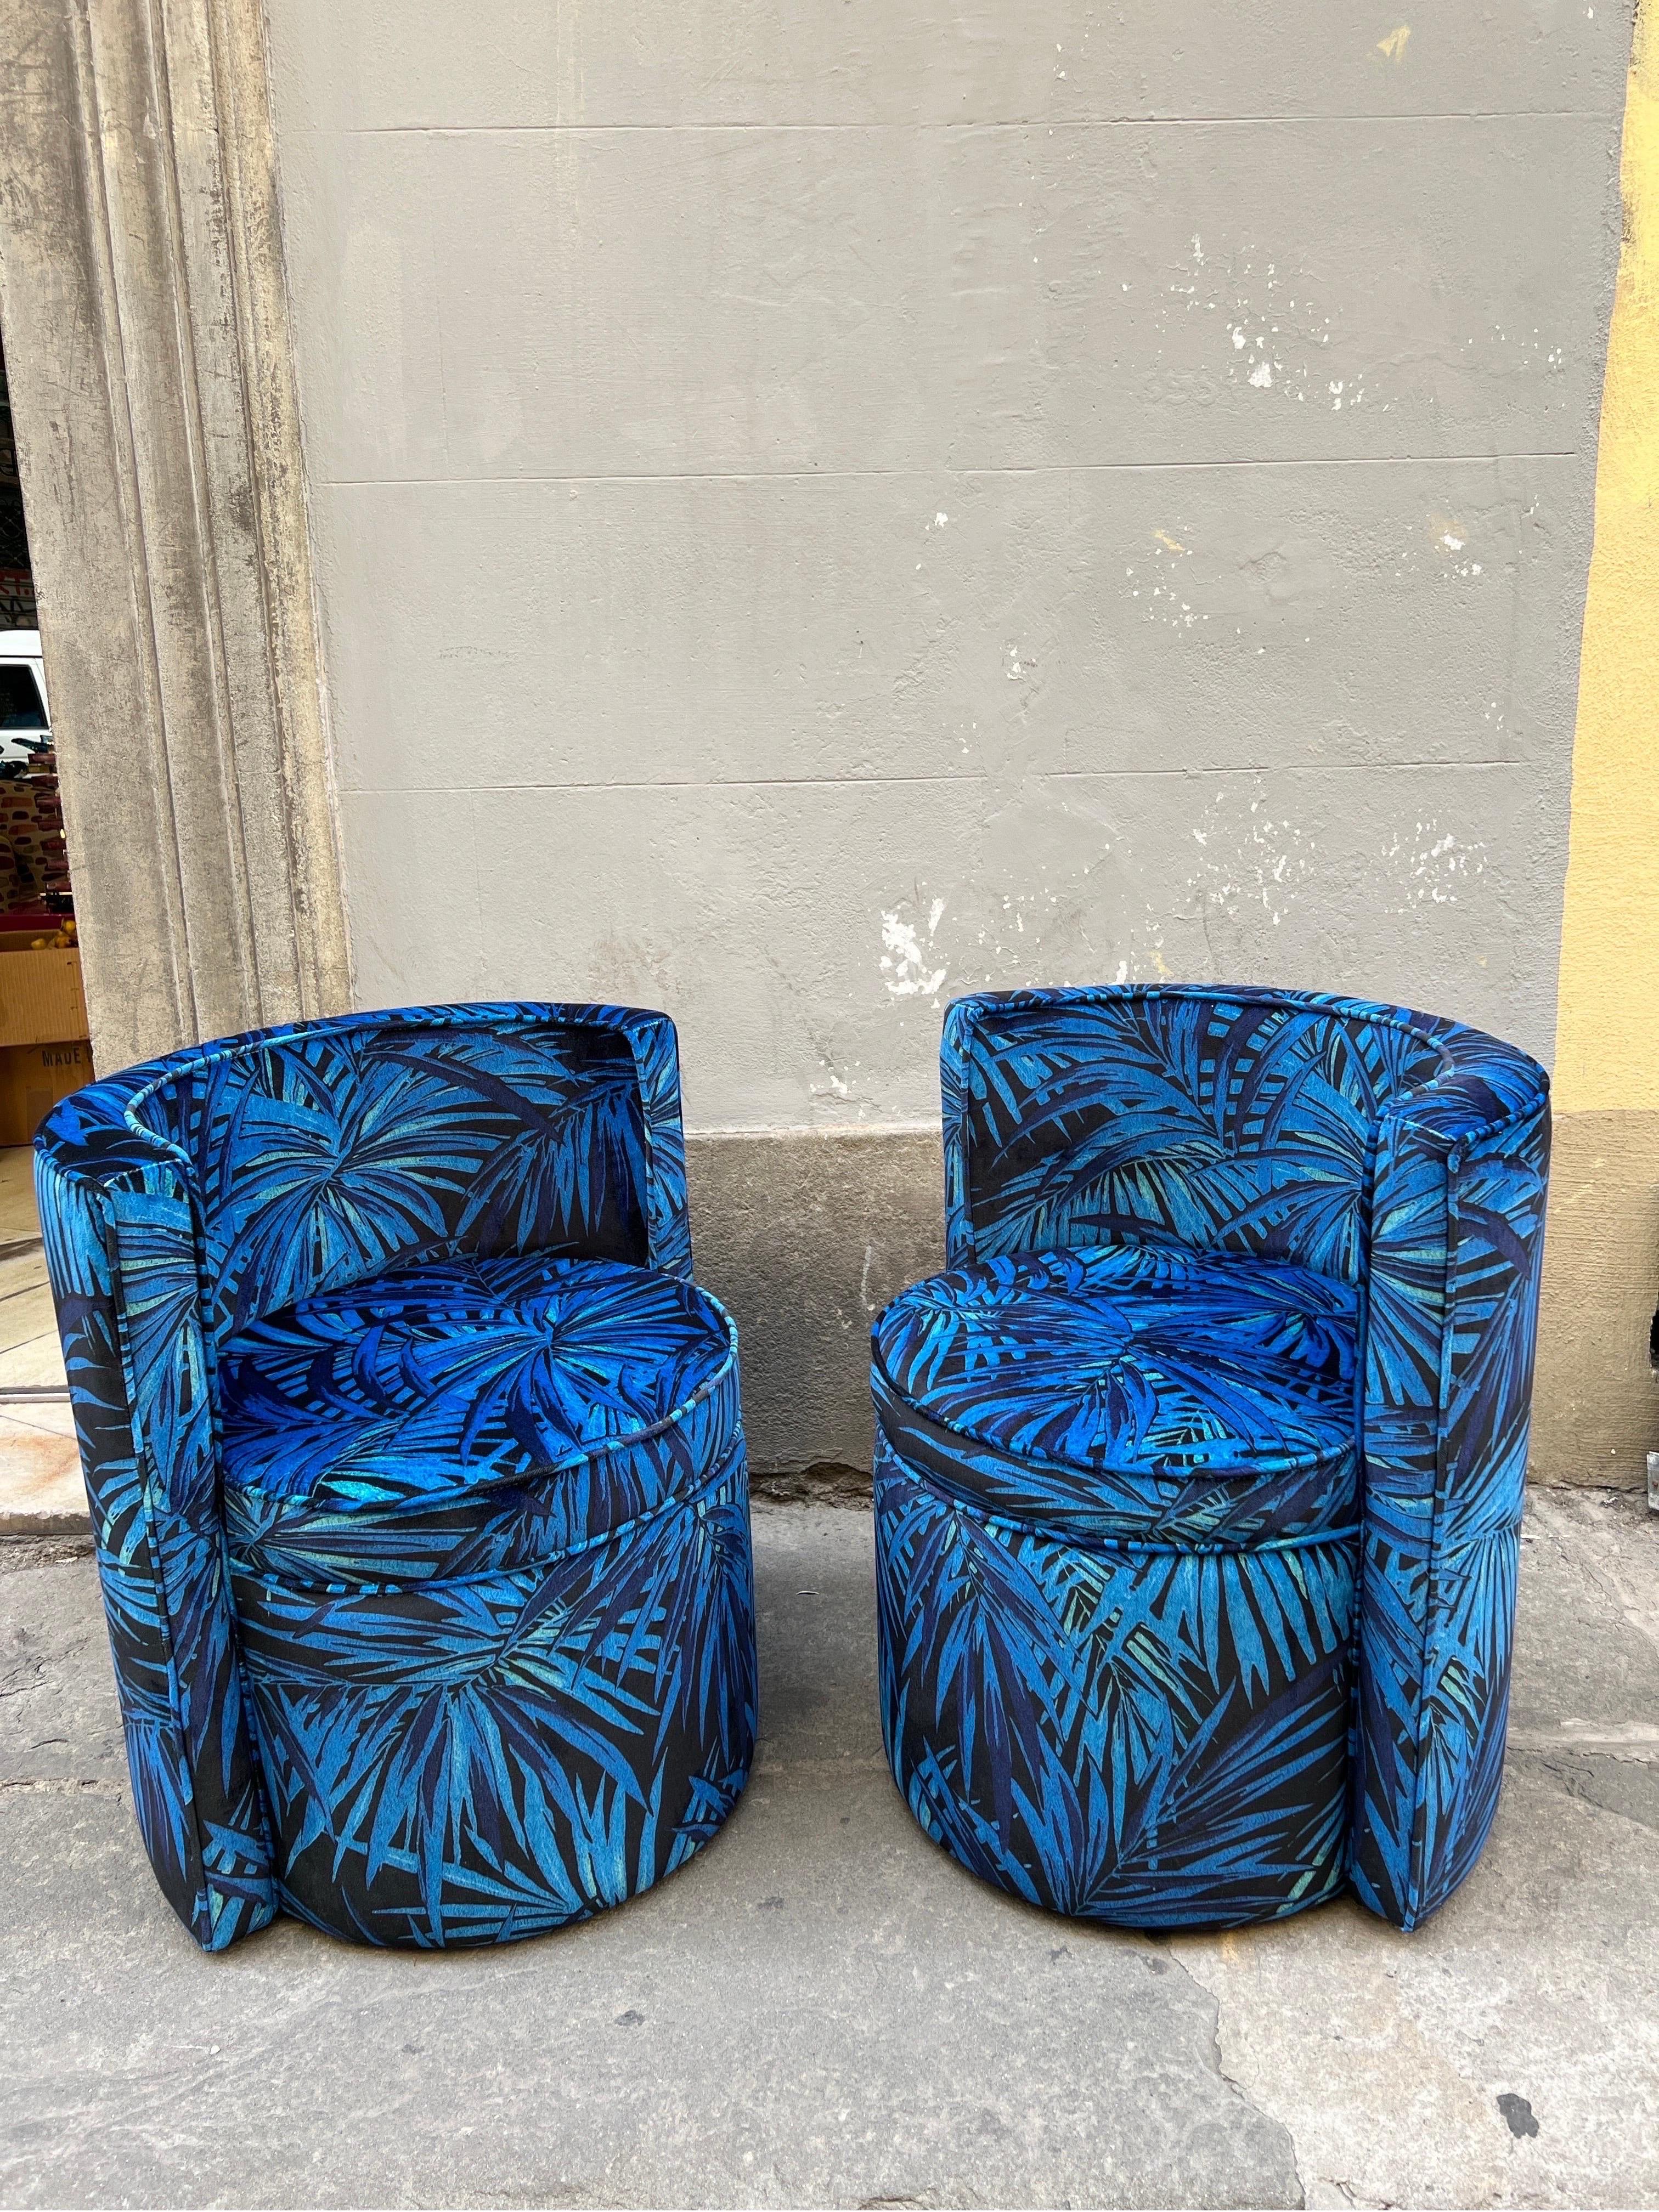 Pair of Upholstered  Armchairs  with Floral Velvet in Shades of Blue  1980 For Sale 5